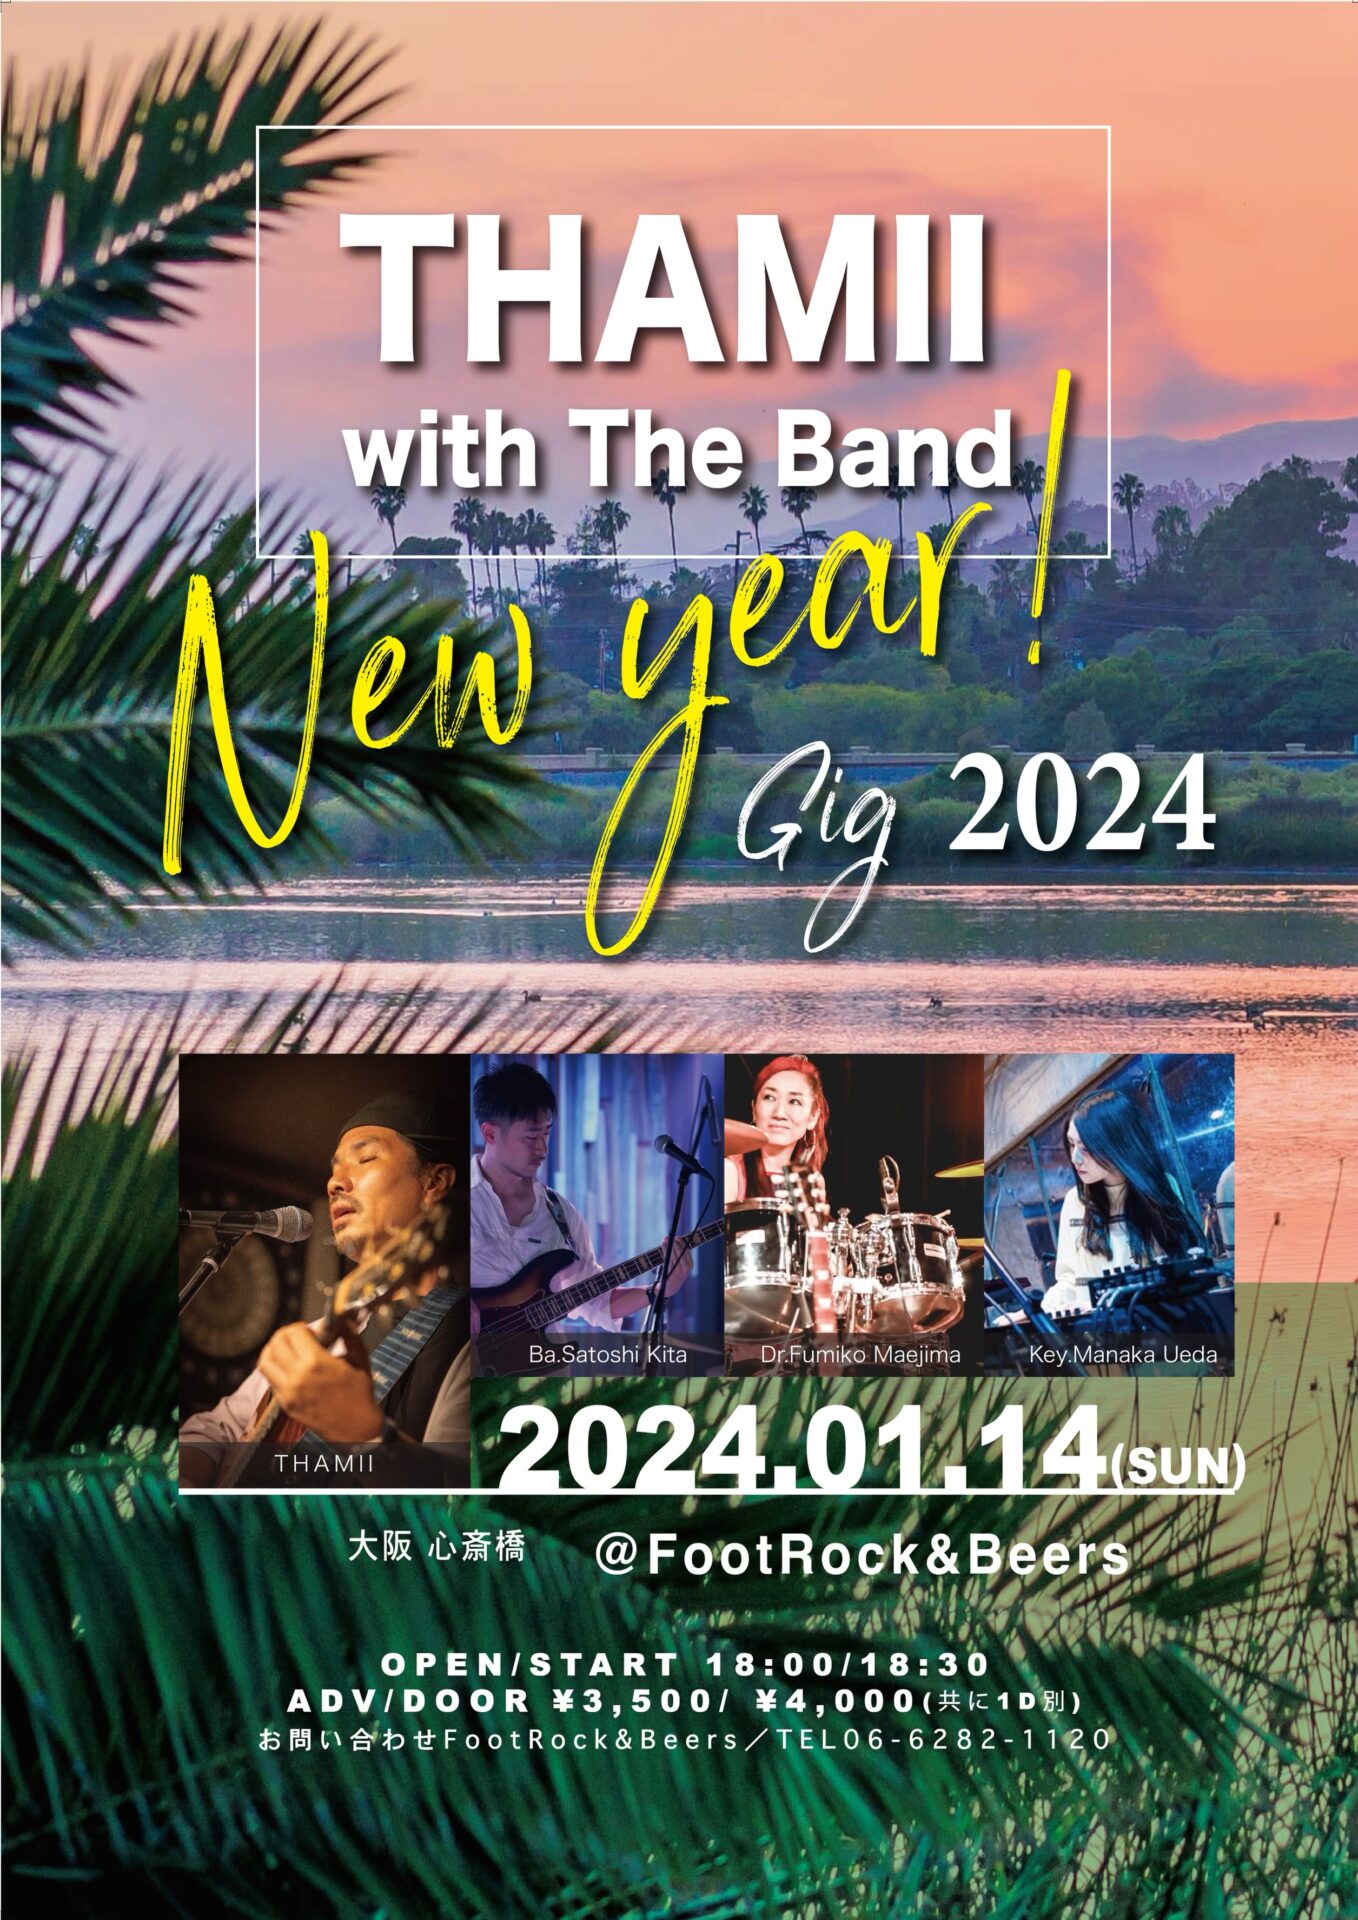 THAMII with The Band~New year! Gig~